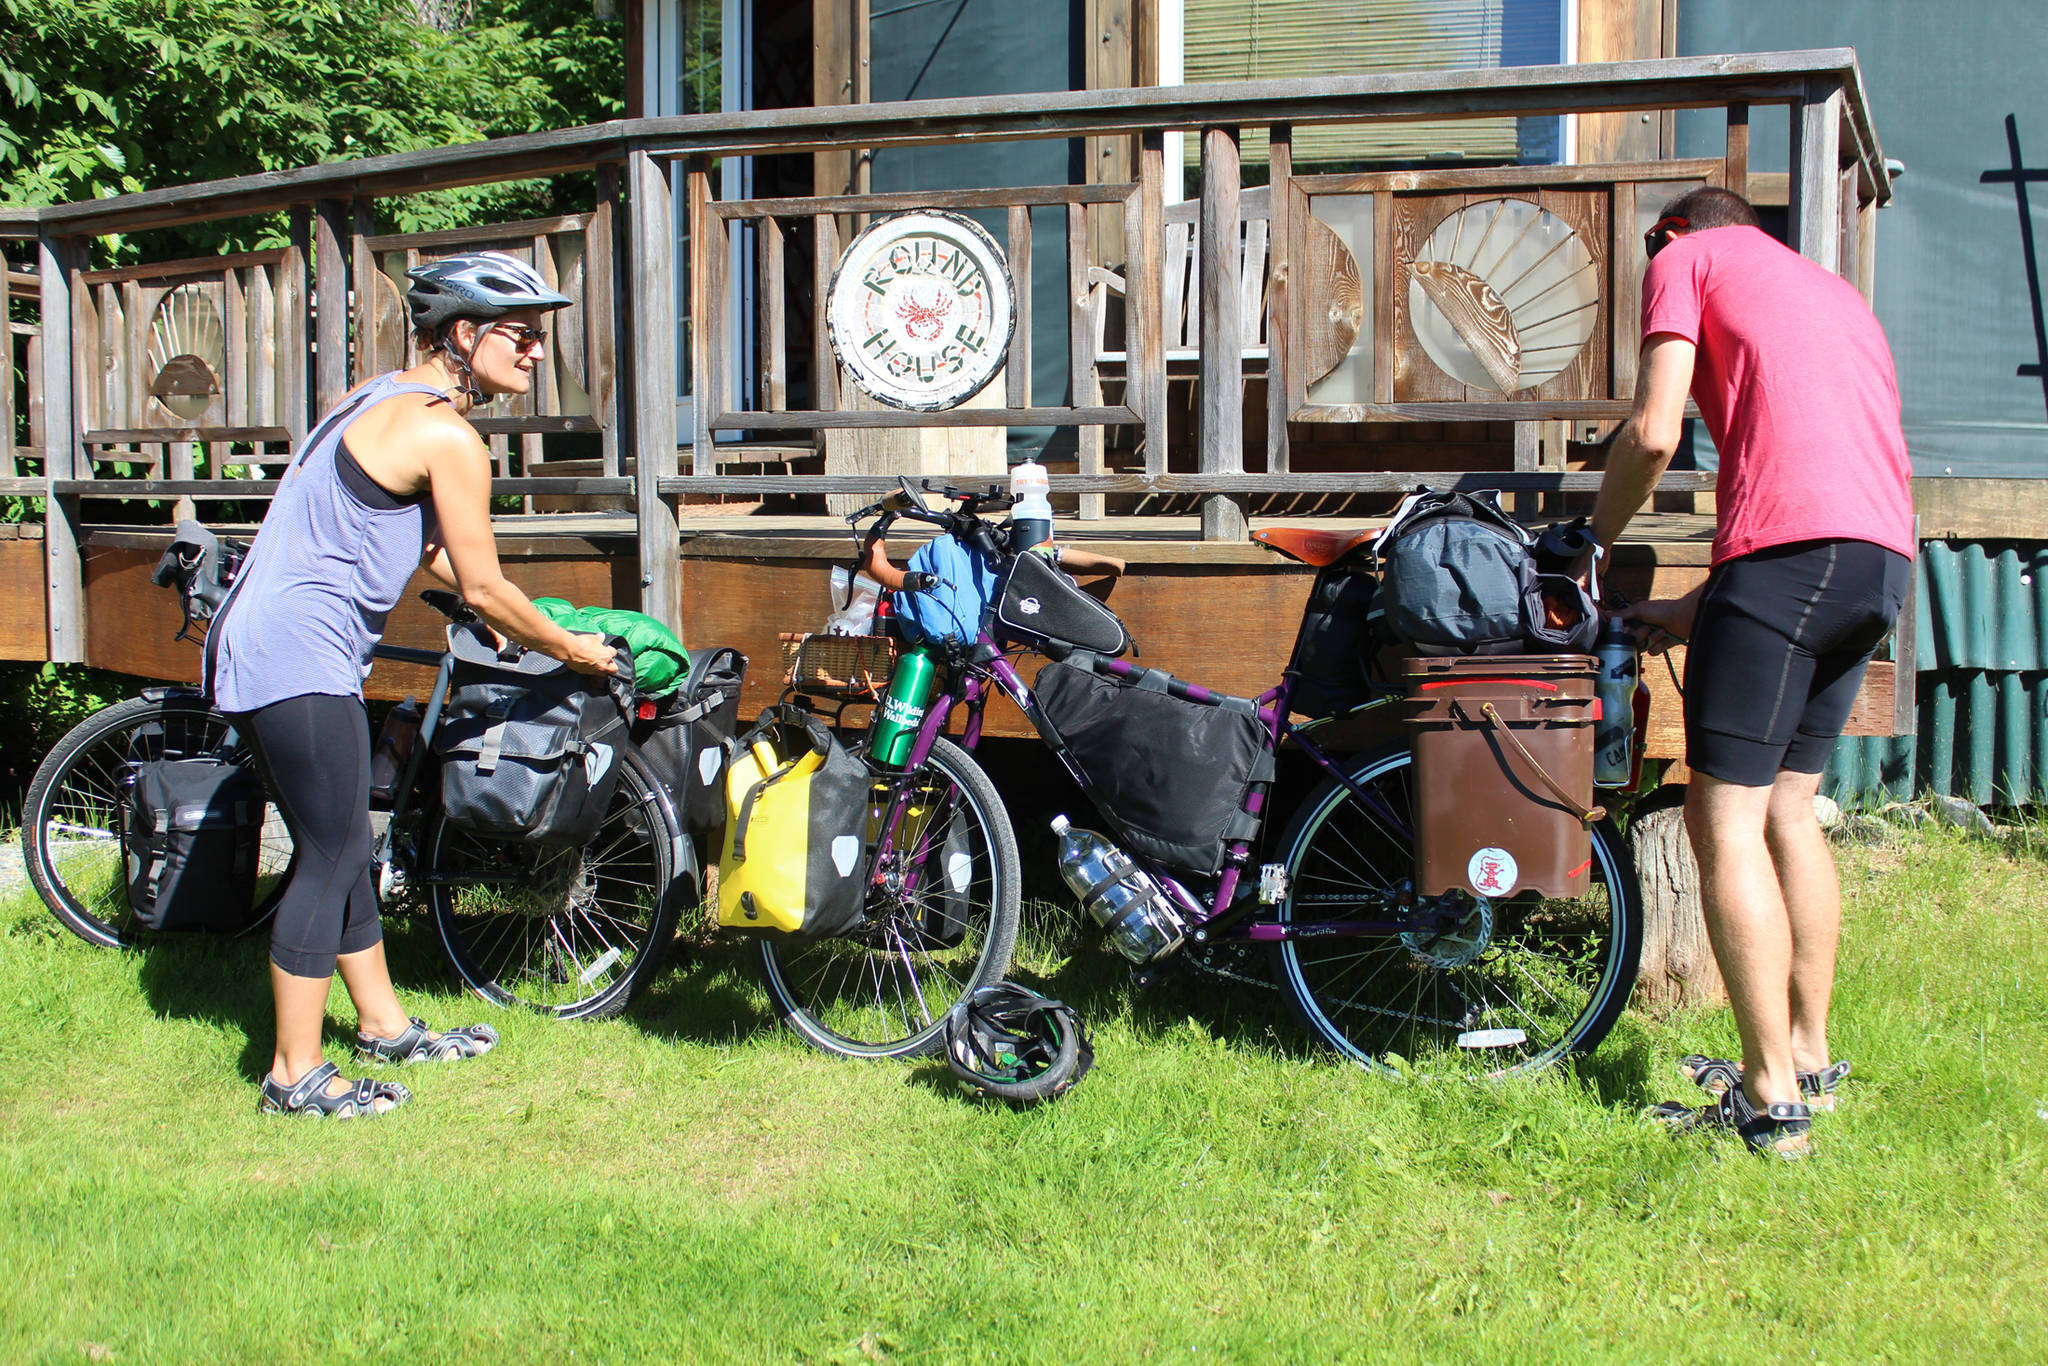 Sophie George and Chris Haag put the finishing touches on their bikes before setting off on a two-year trek from Alaska to Argentina on Monday, July 2, 2018 on Hidden Way in Homer, Alaska. The husband and wife packed up their life in Utah prior to the adventure. (Photo by Megan Pacer/Homer News)